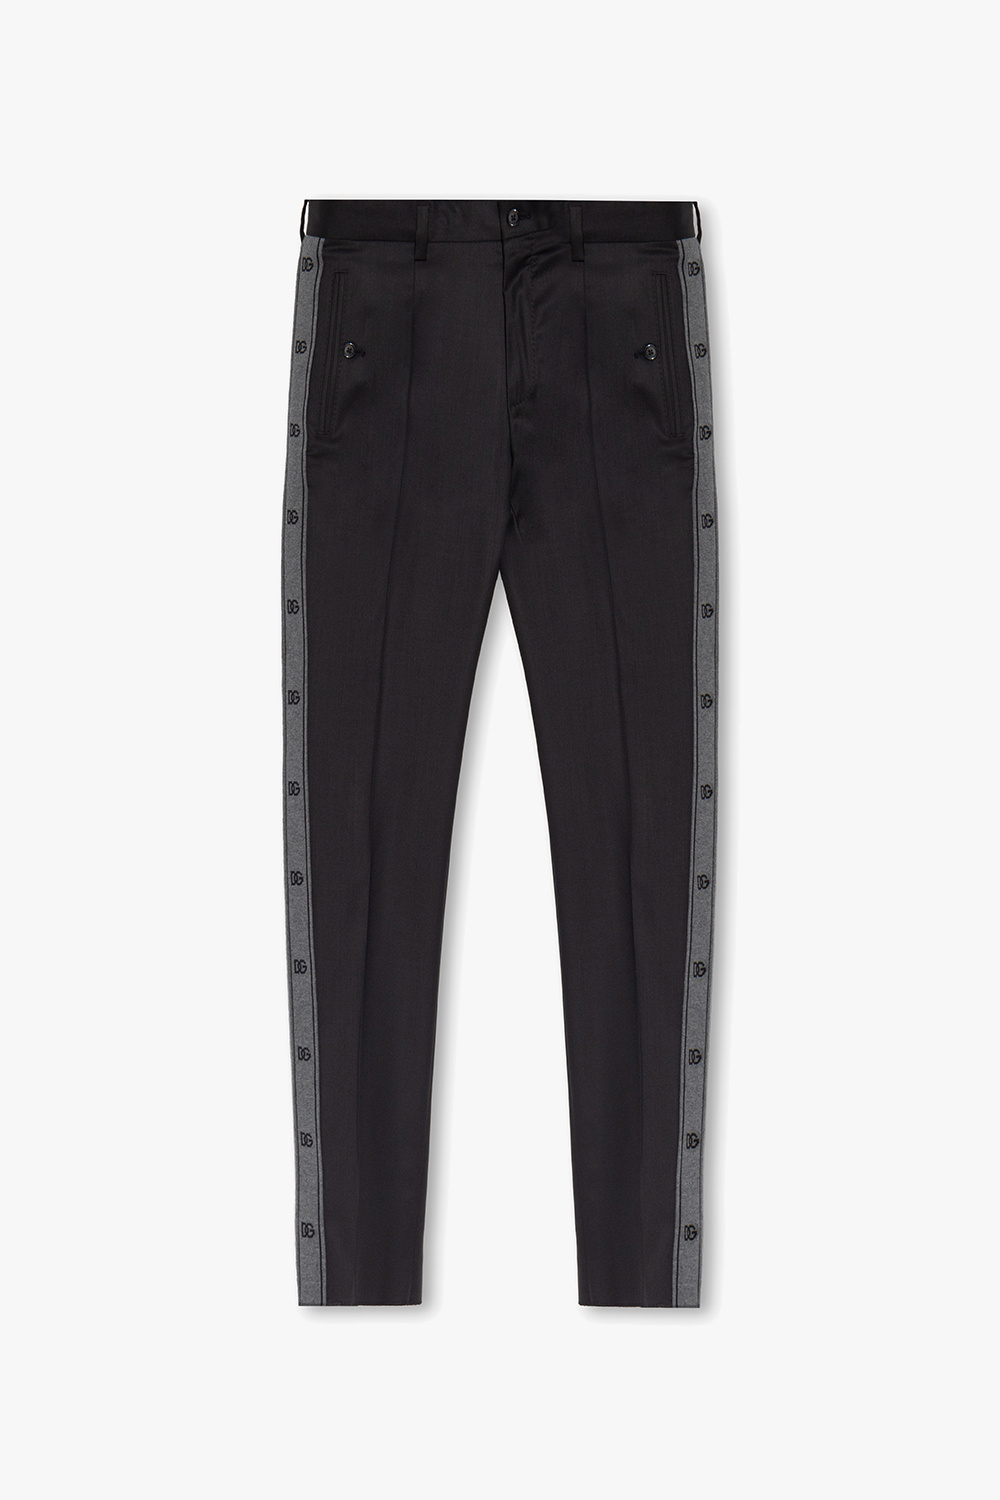 Dolce & Gabbana Pleat-front trousers check with side panels